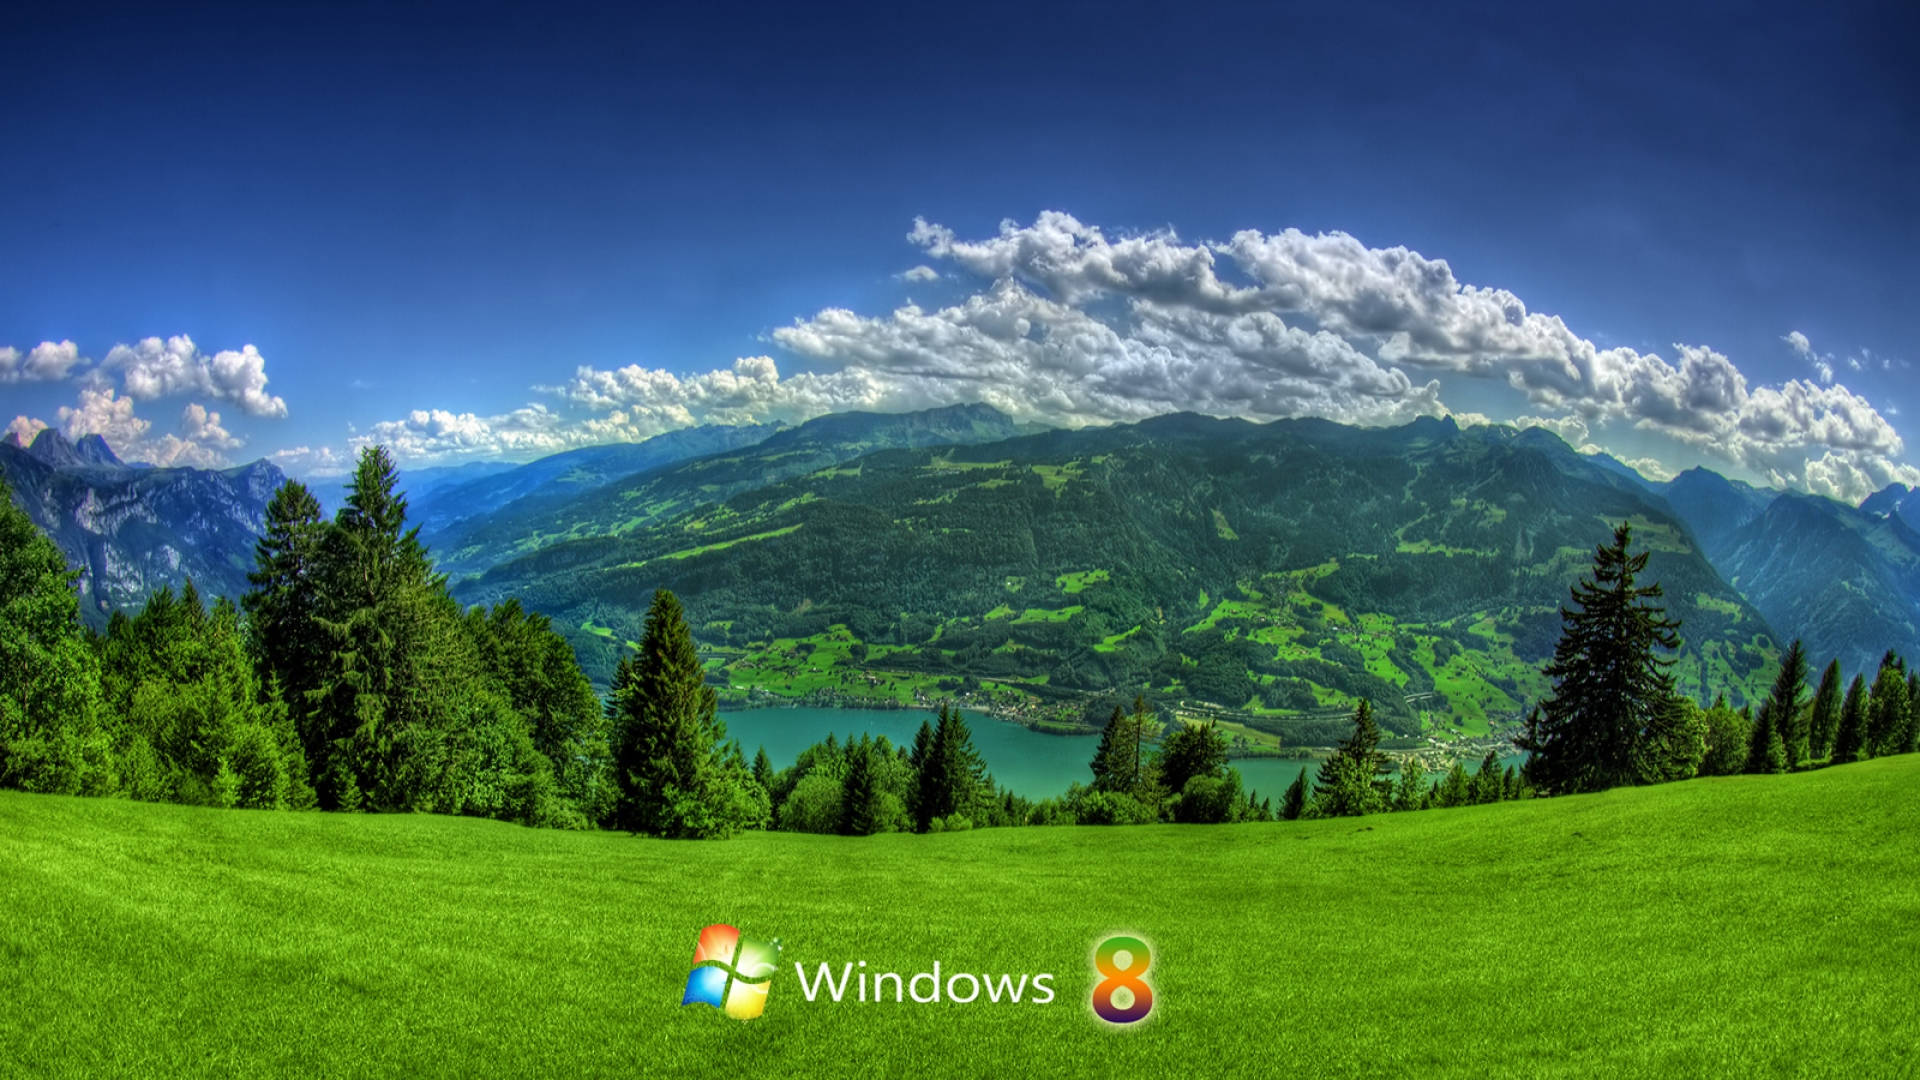 hd wallpapers windows 8 nature